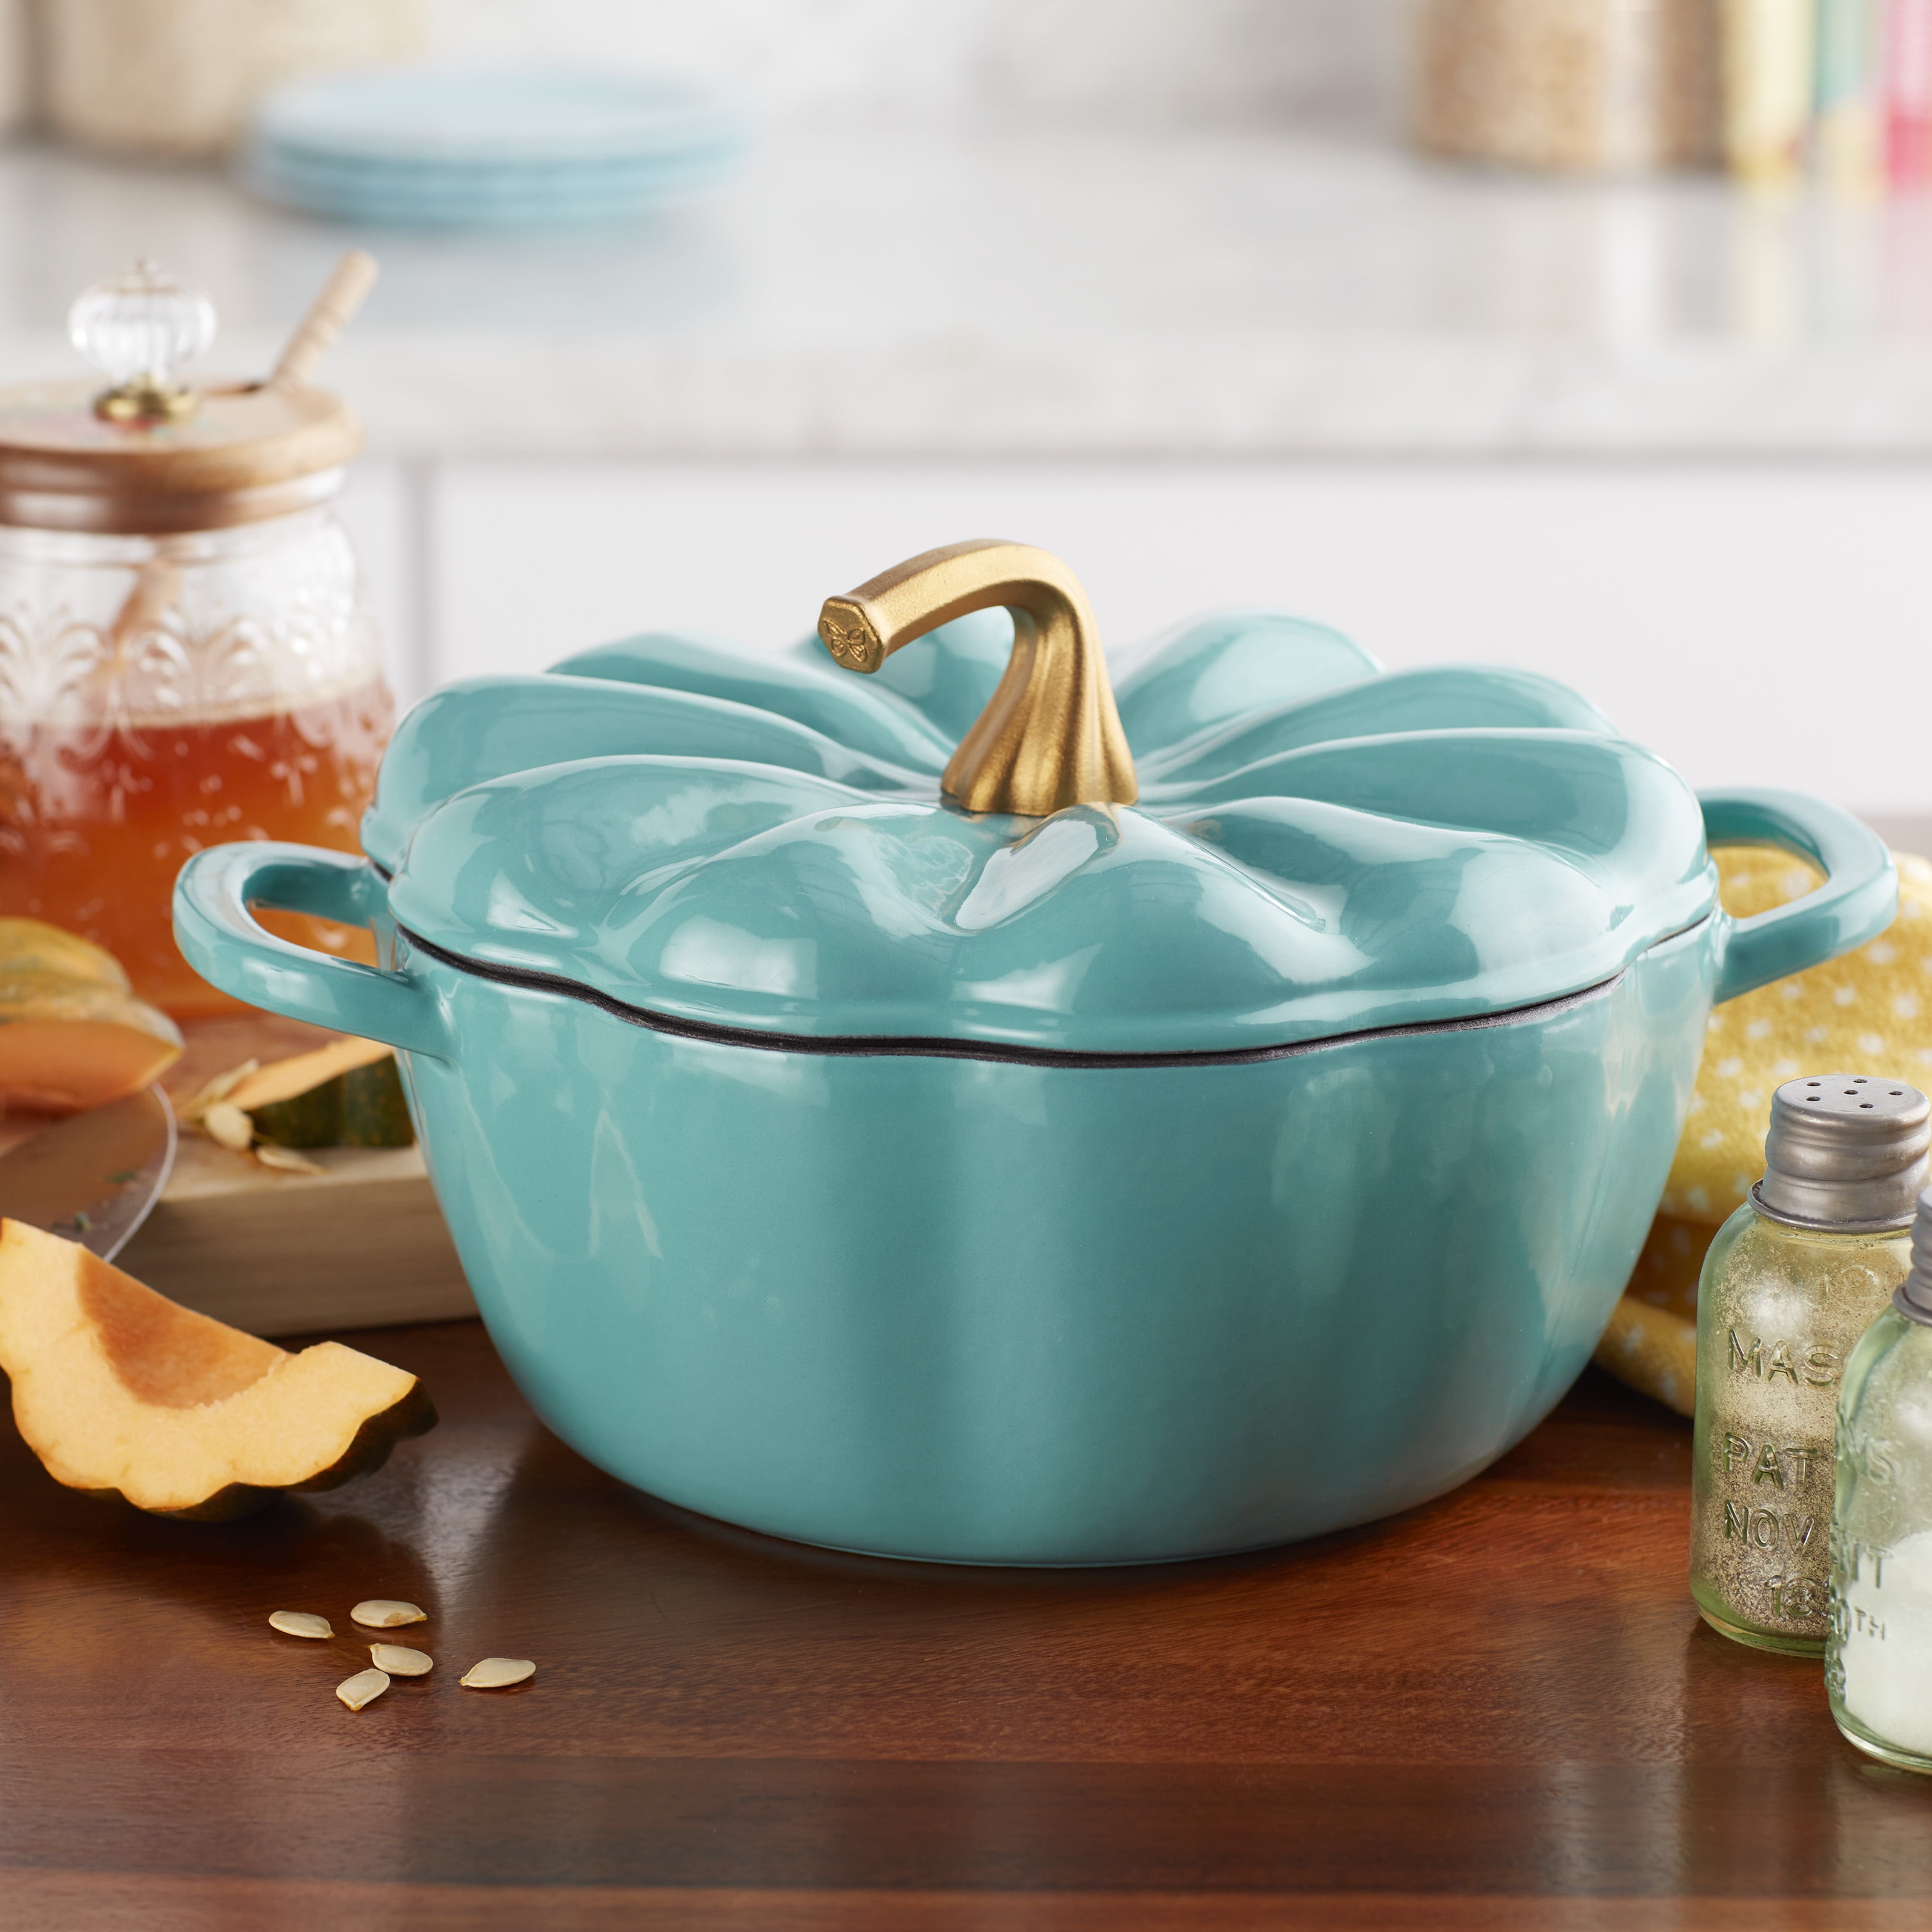 The Pioneer Woman Has Released A Pumpkin Dutch Oven For Thanksgiving